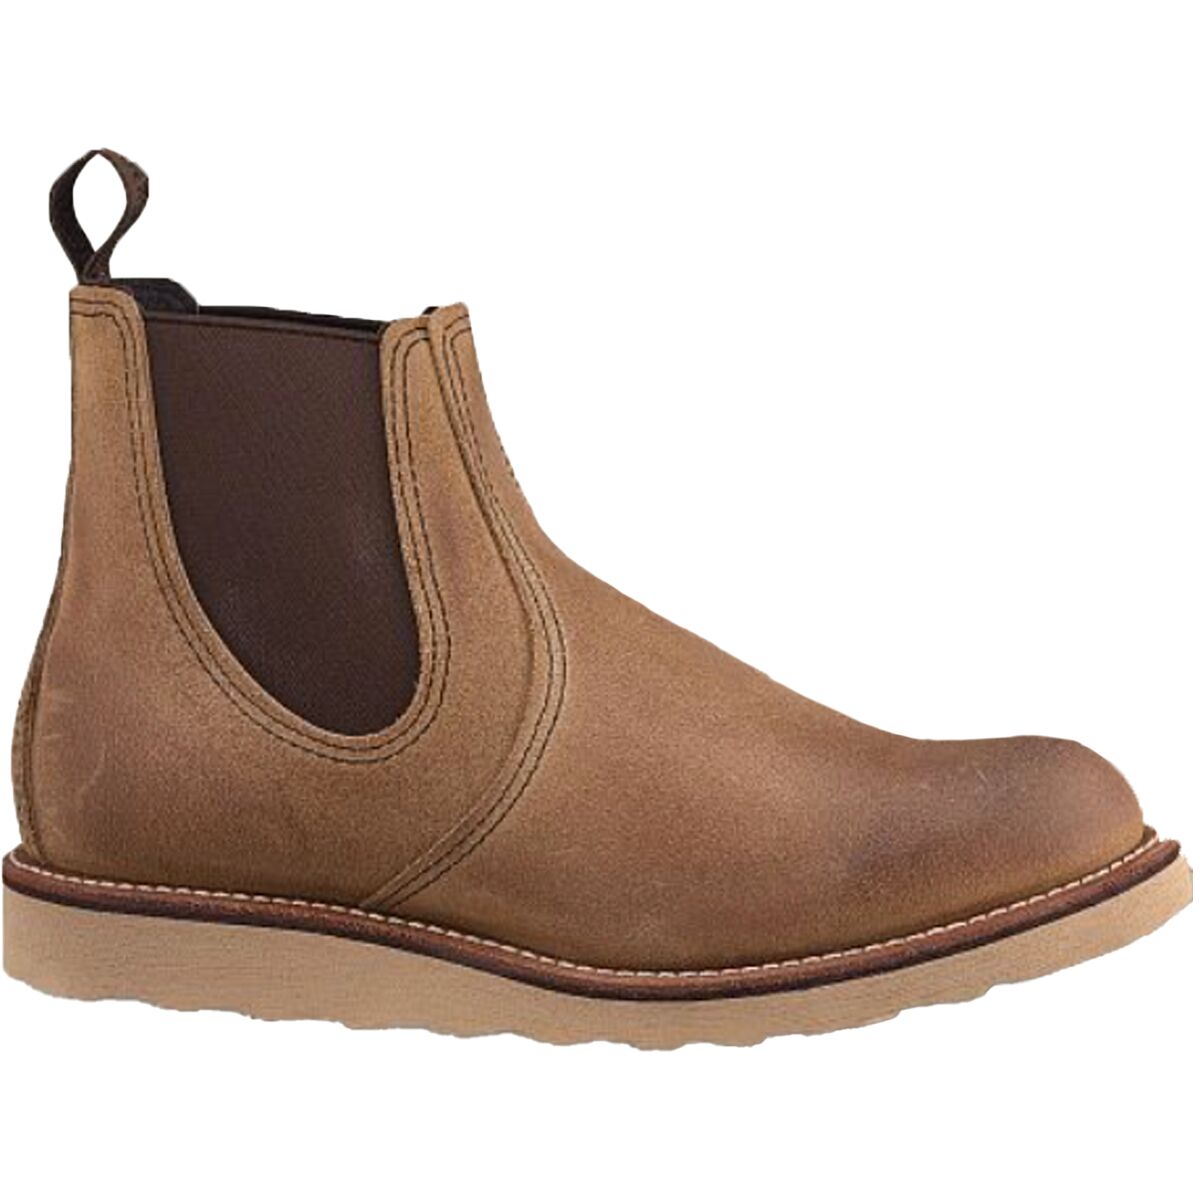 Red Wing Heritage Classic Chelsea Boot - Men's